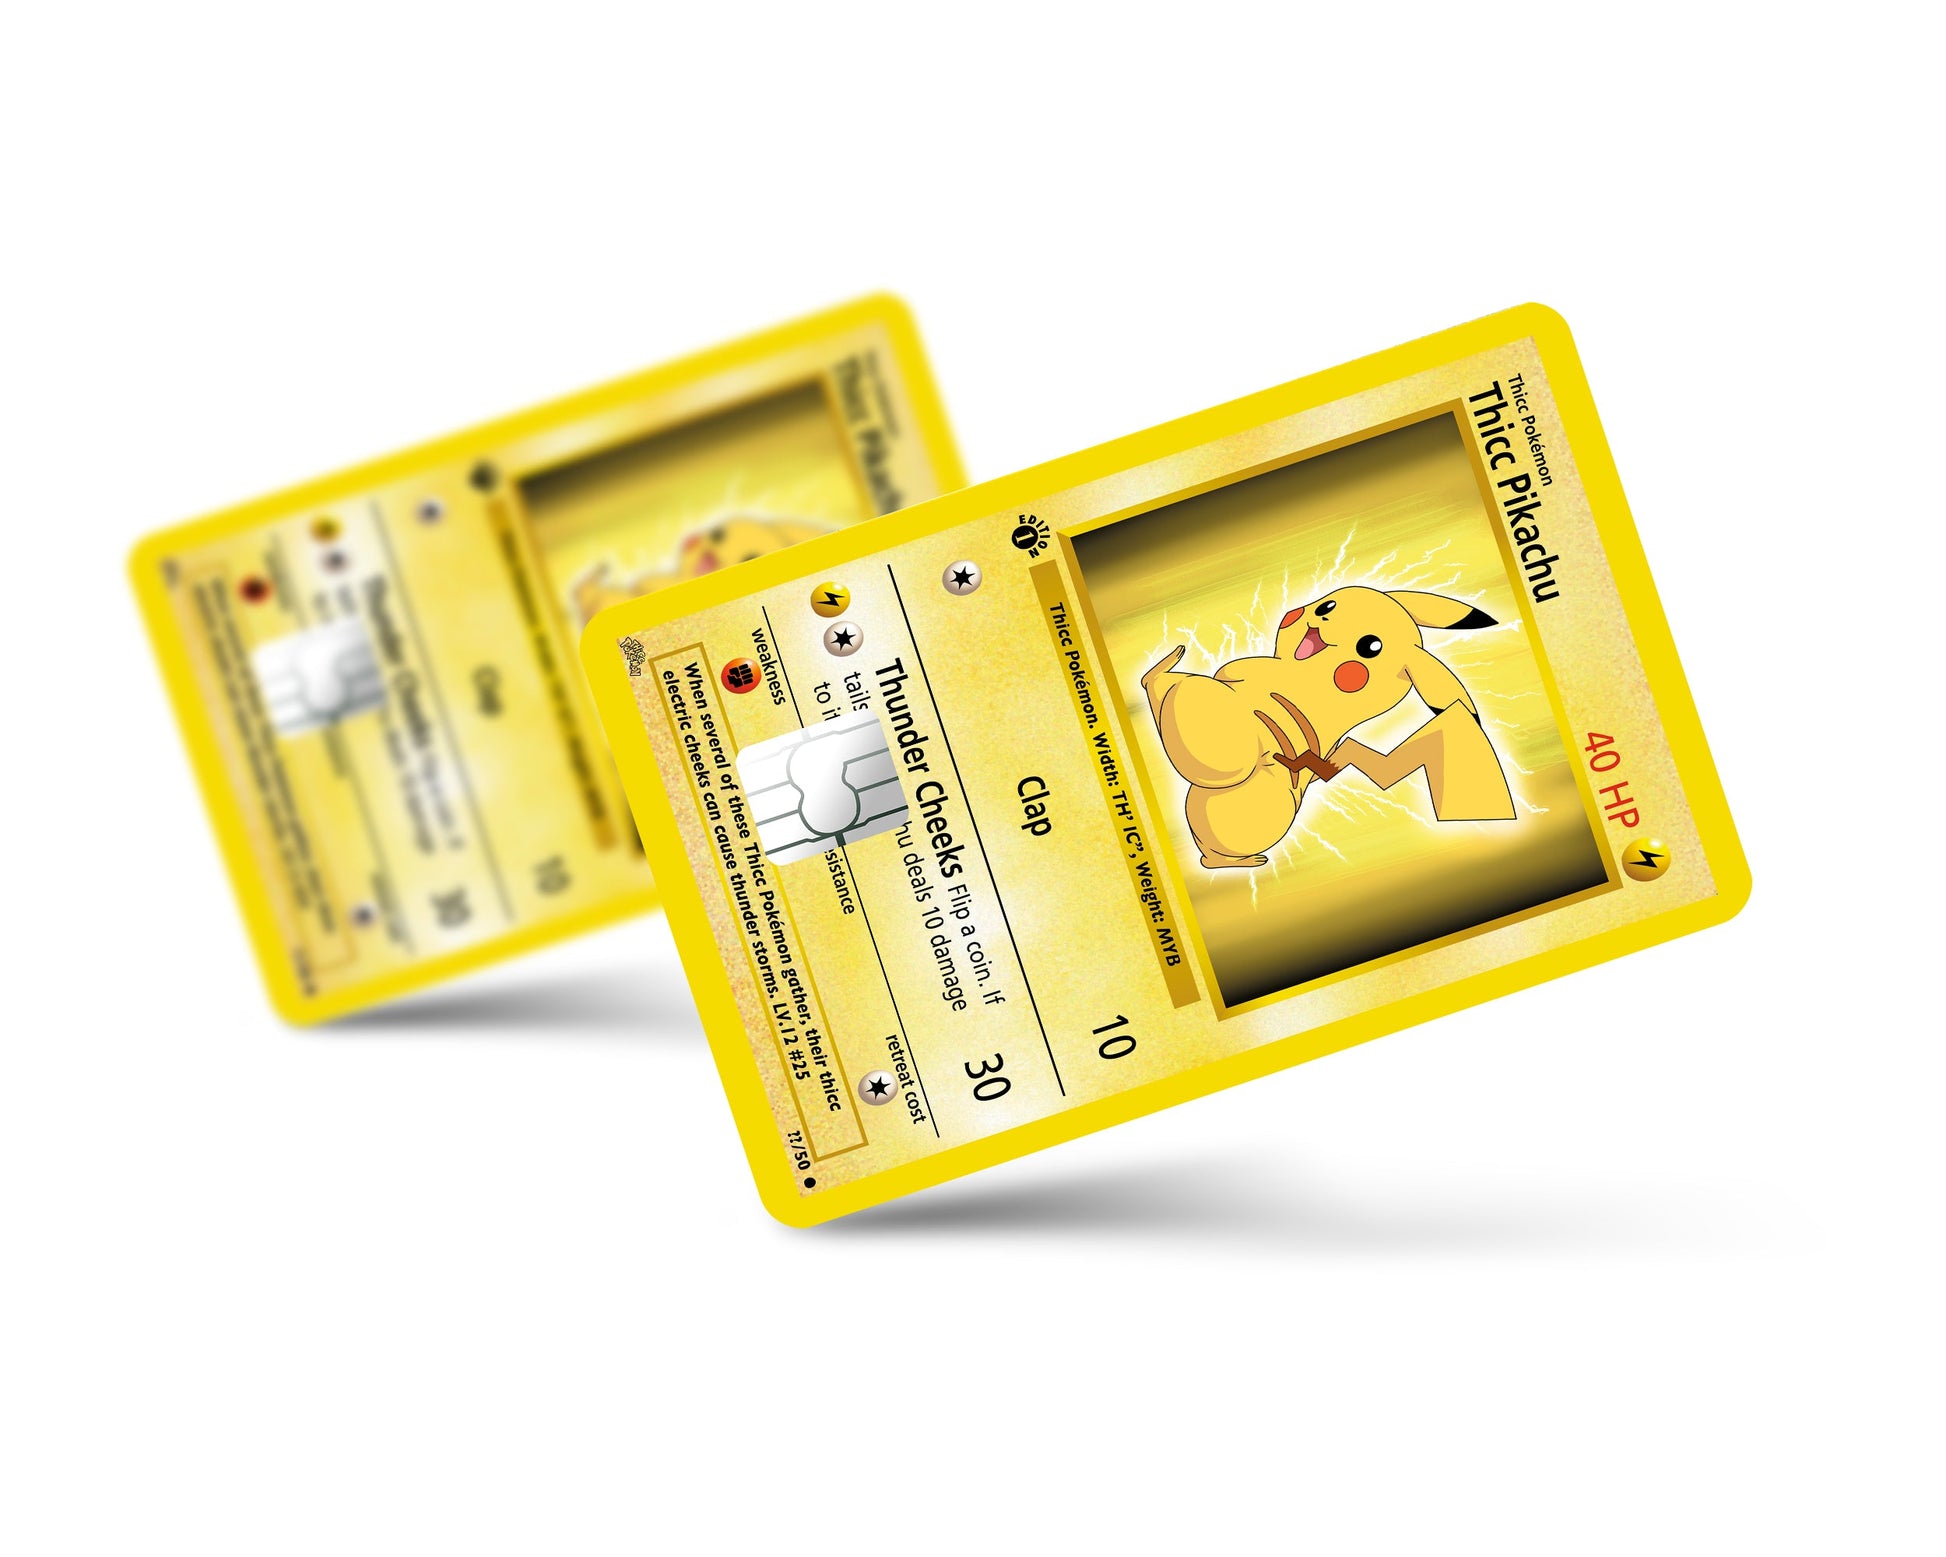 Check out my new credit card skin! : r/pokemoncards